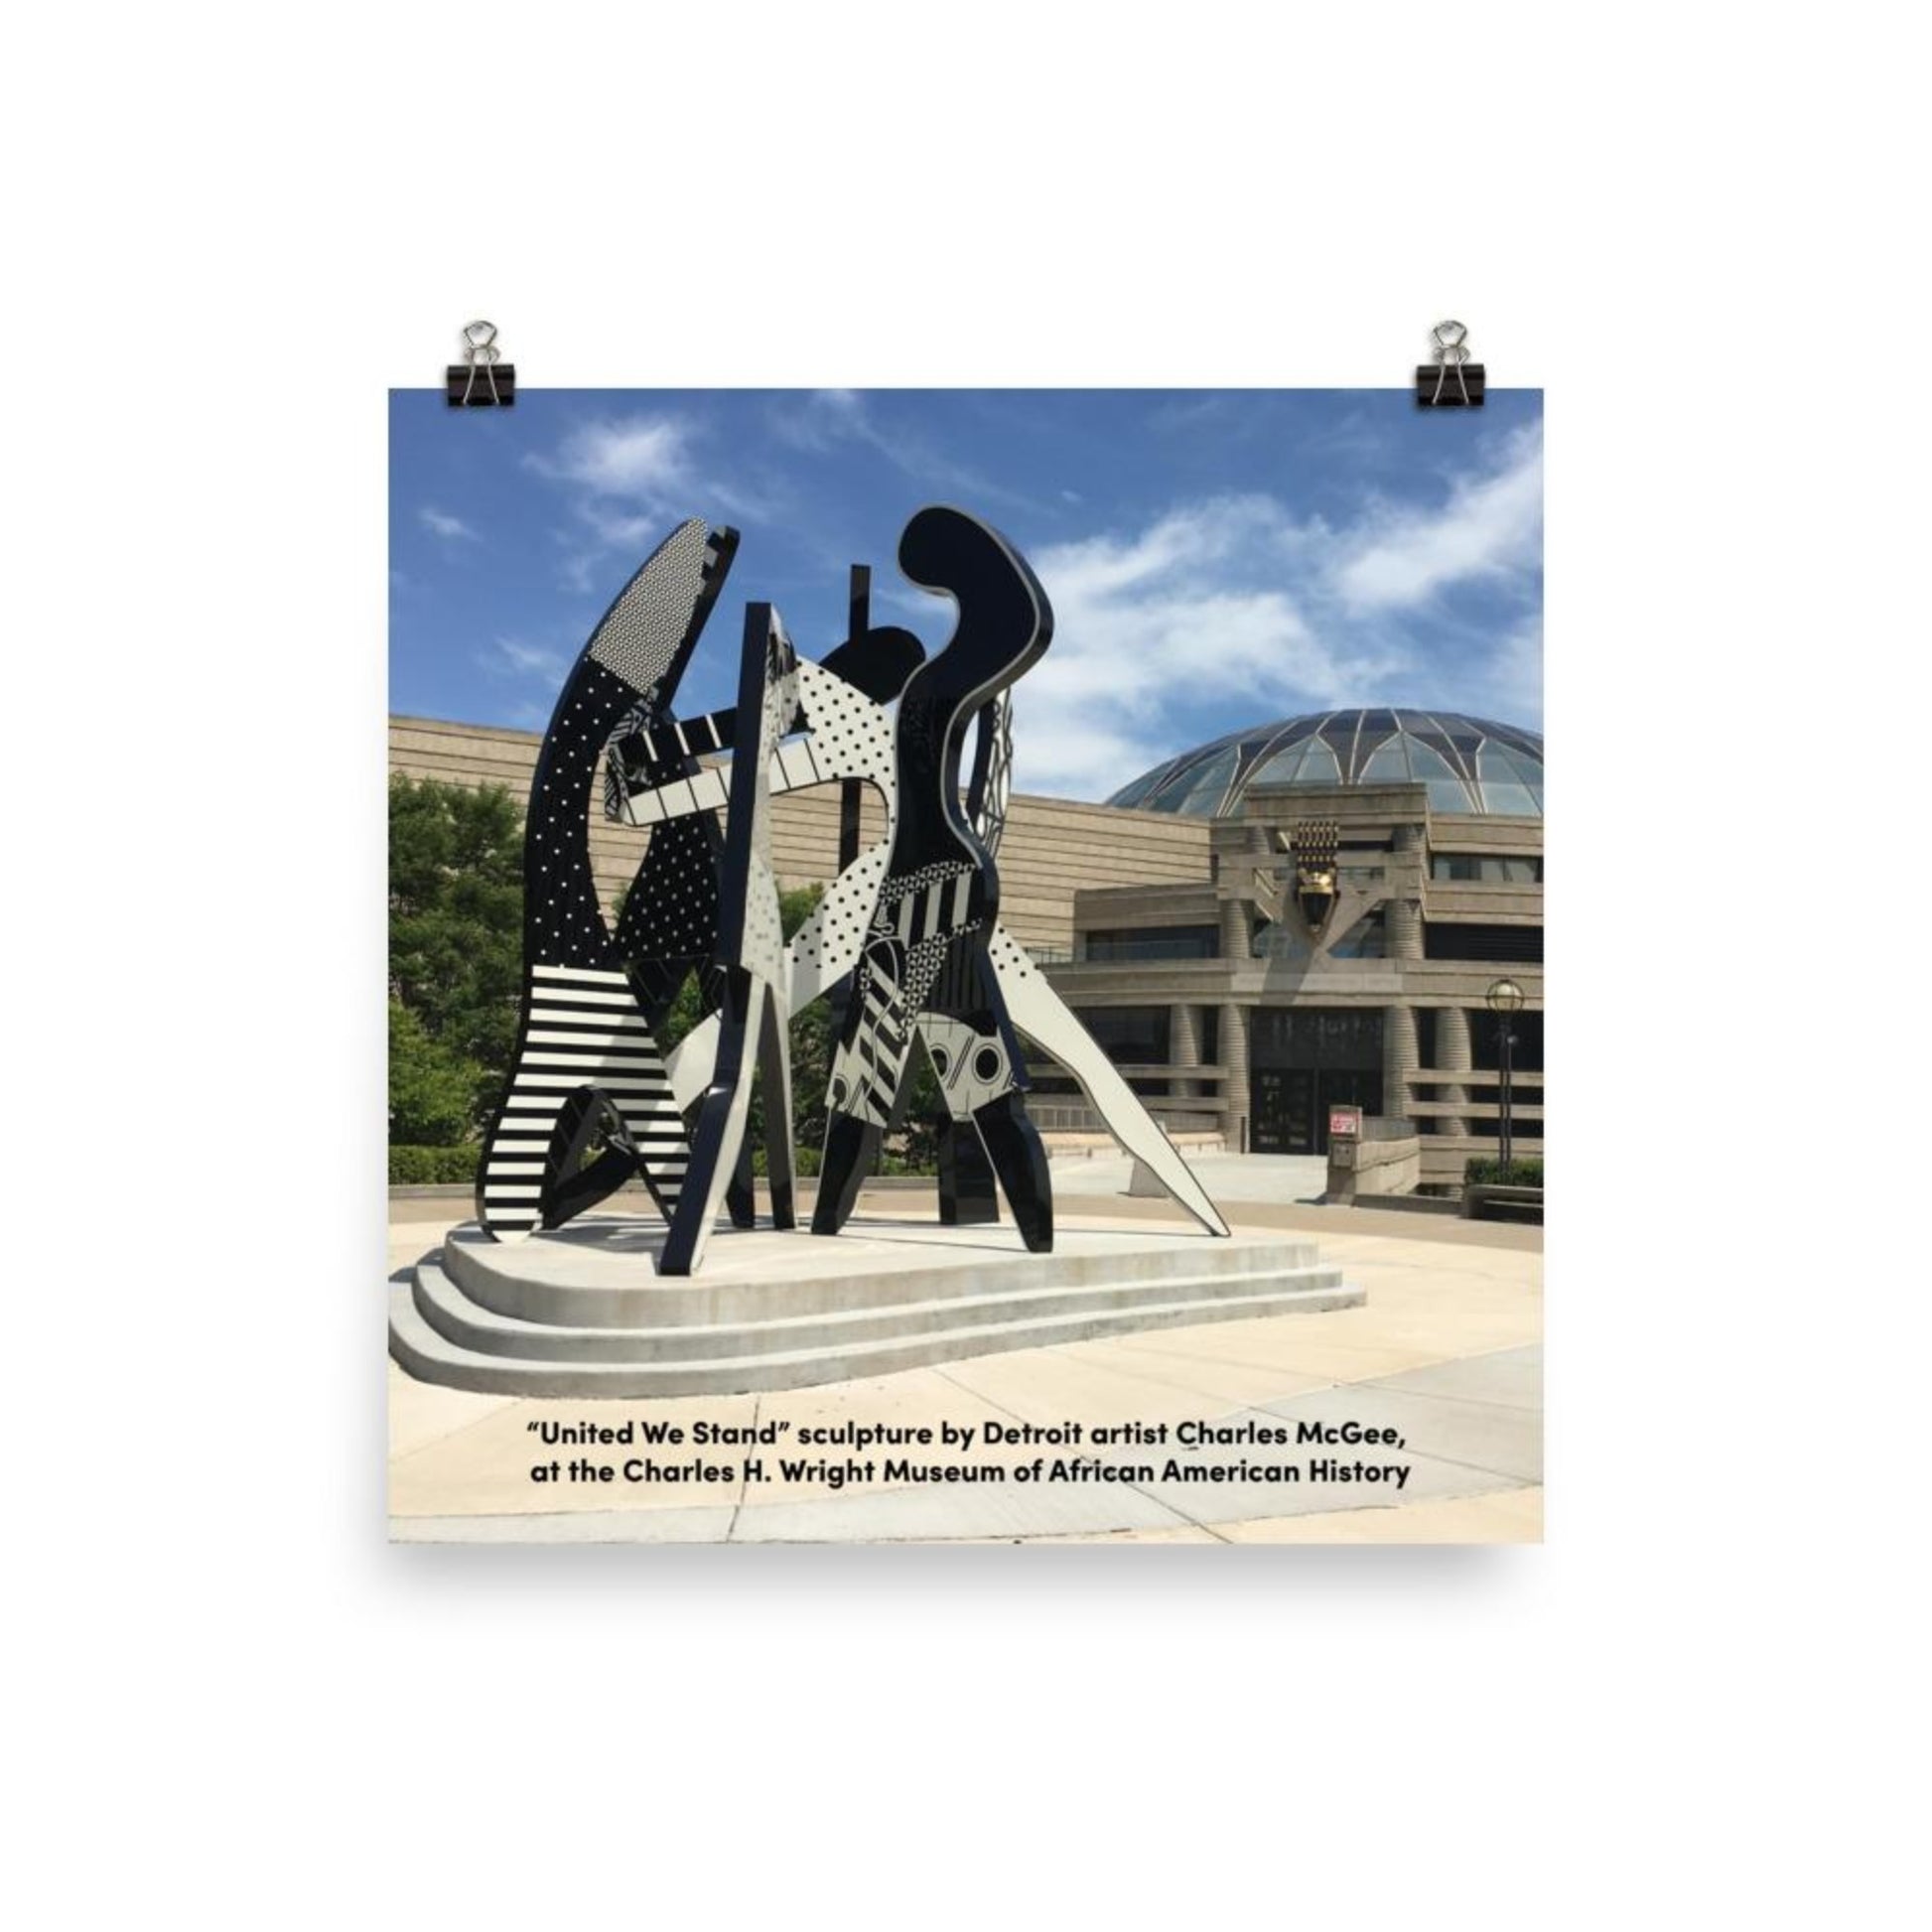 14 inch by 14 inch poster with United We Stand sculpture in front of Charles H. Wright Museum of African American History